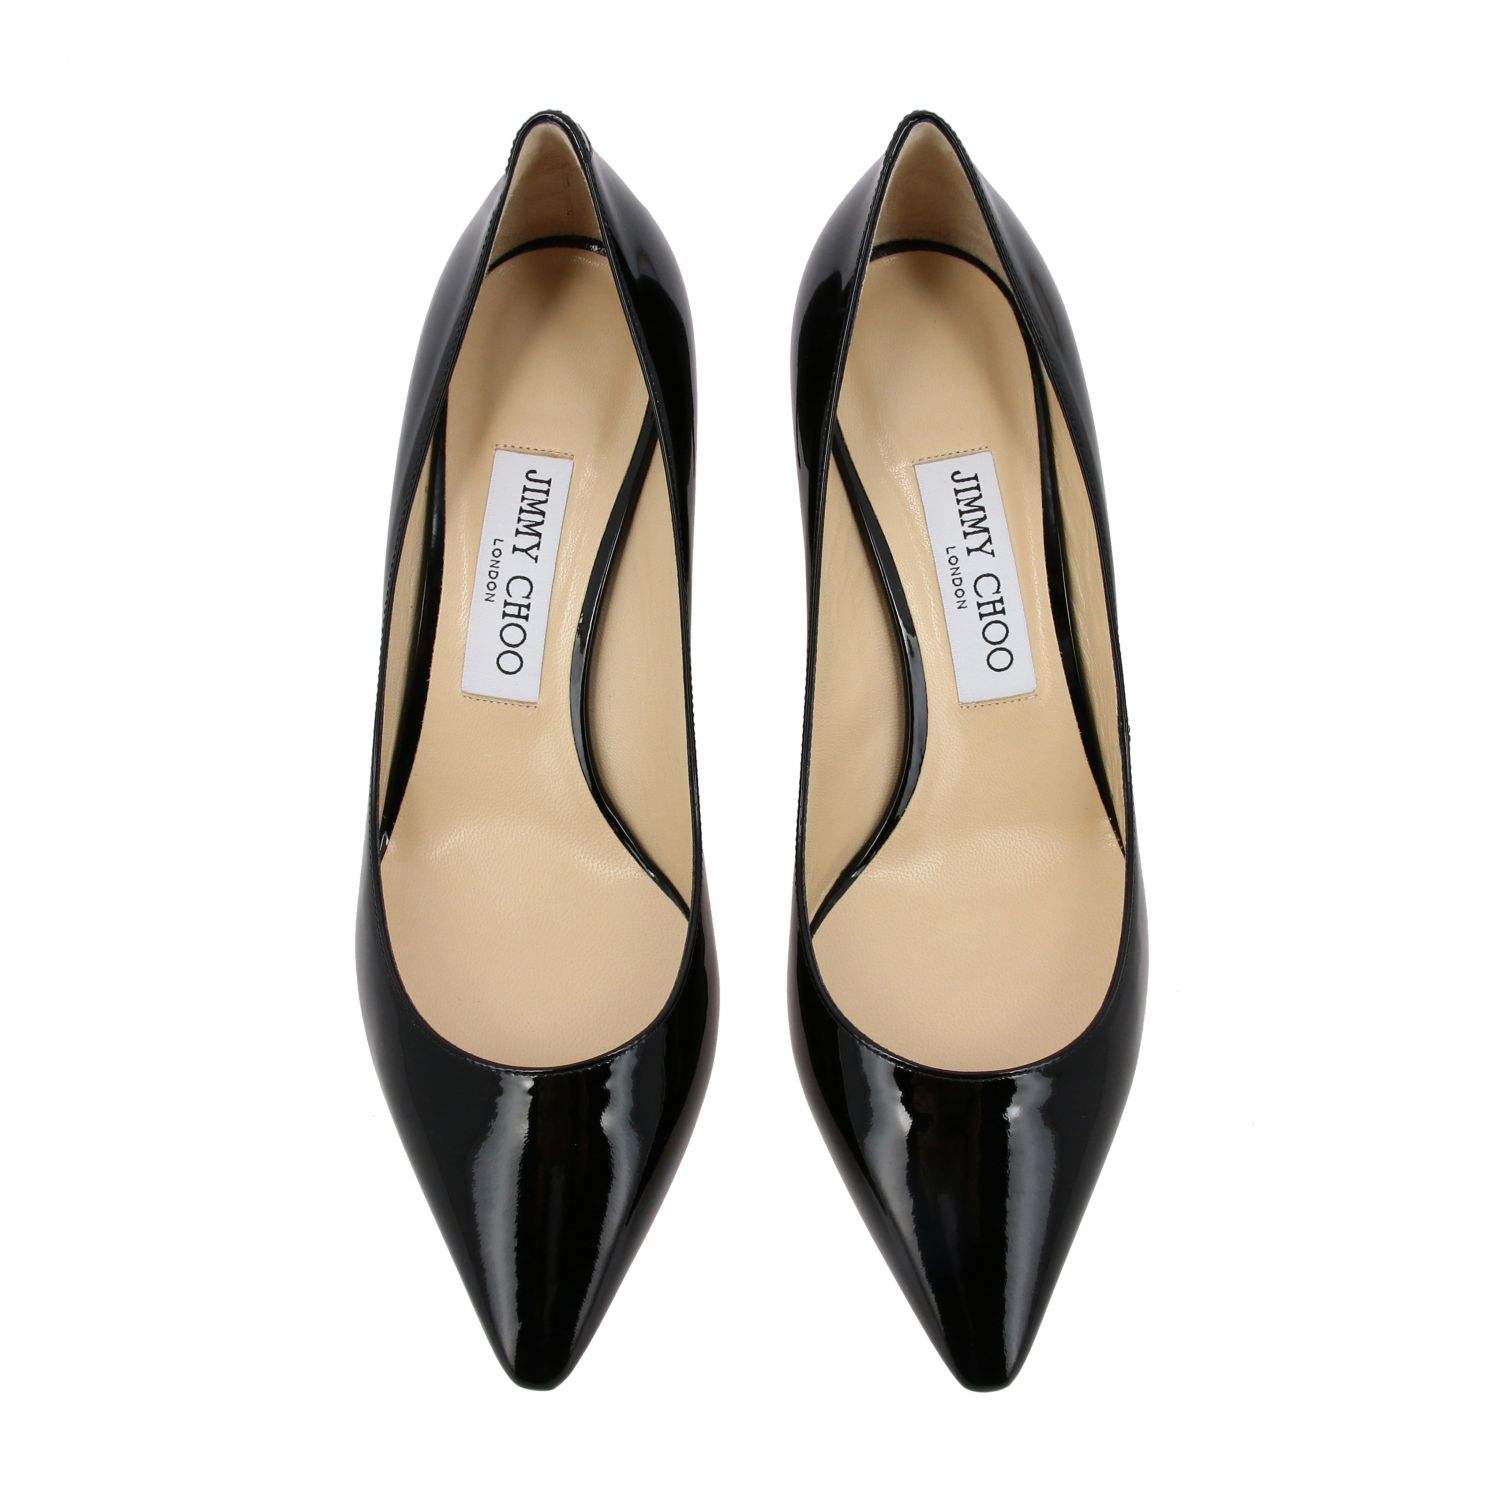 Jimmy Choo Outlet: Romy pumps in patent leather - Black | Jimmy Choo ...